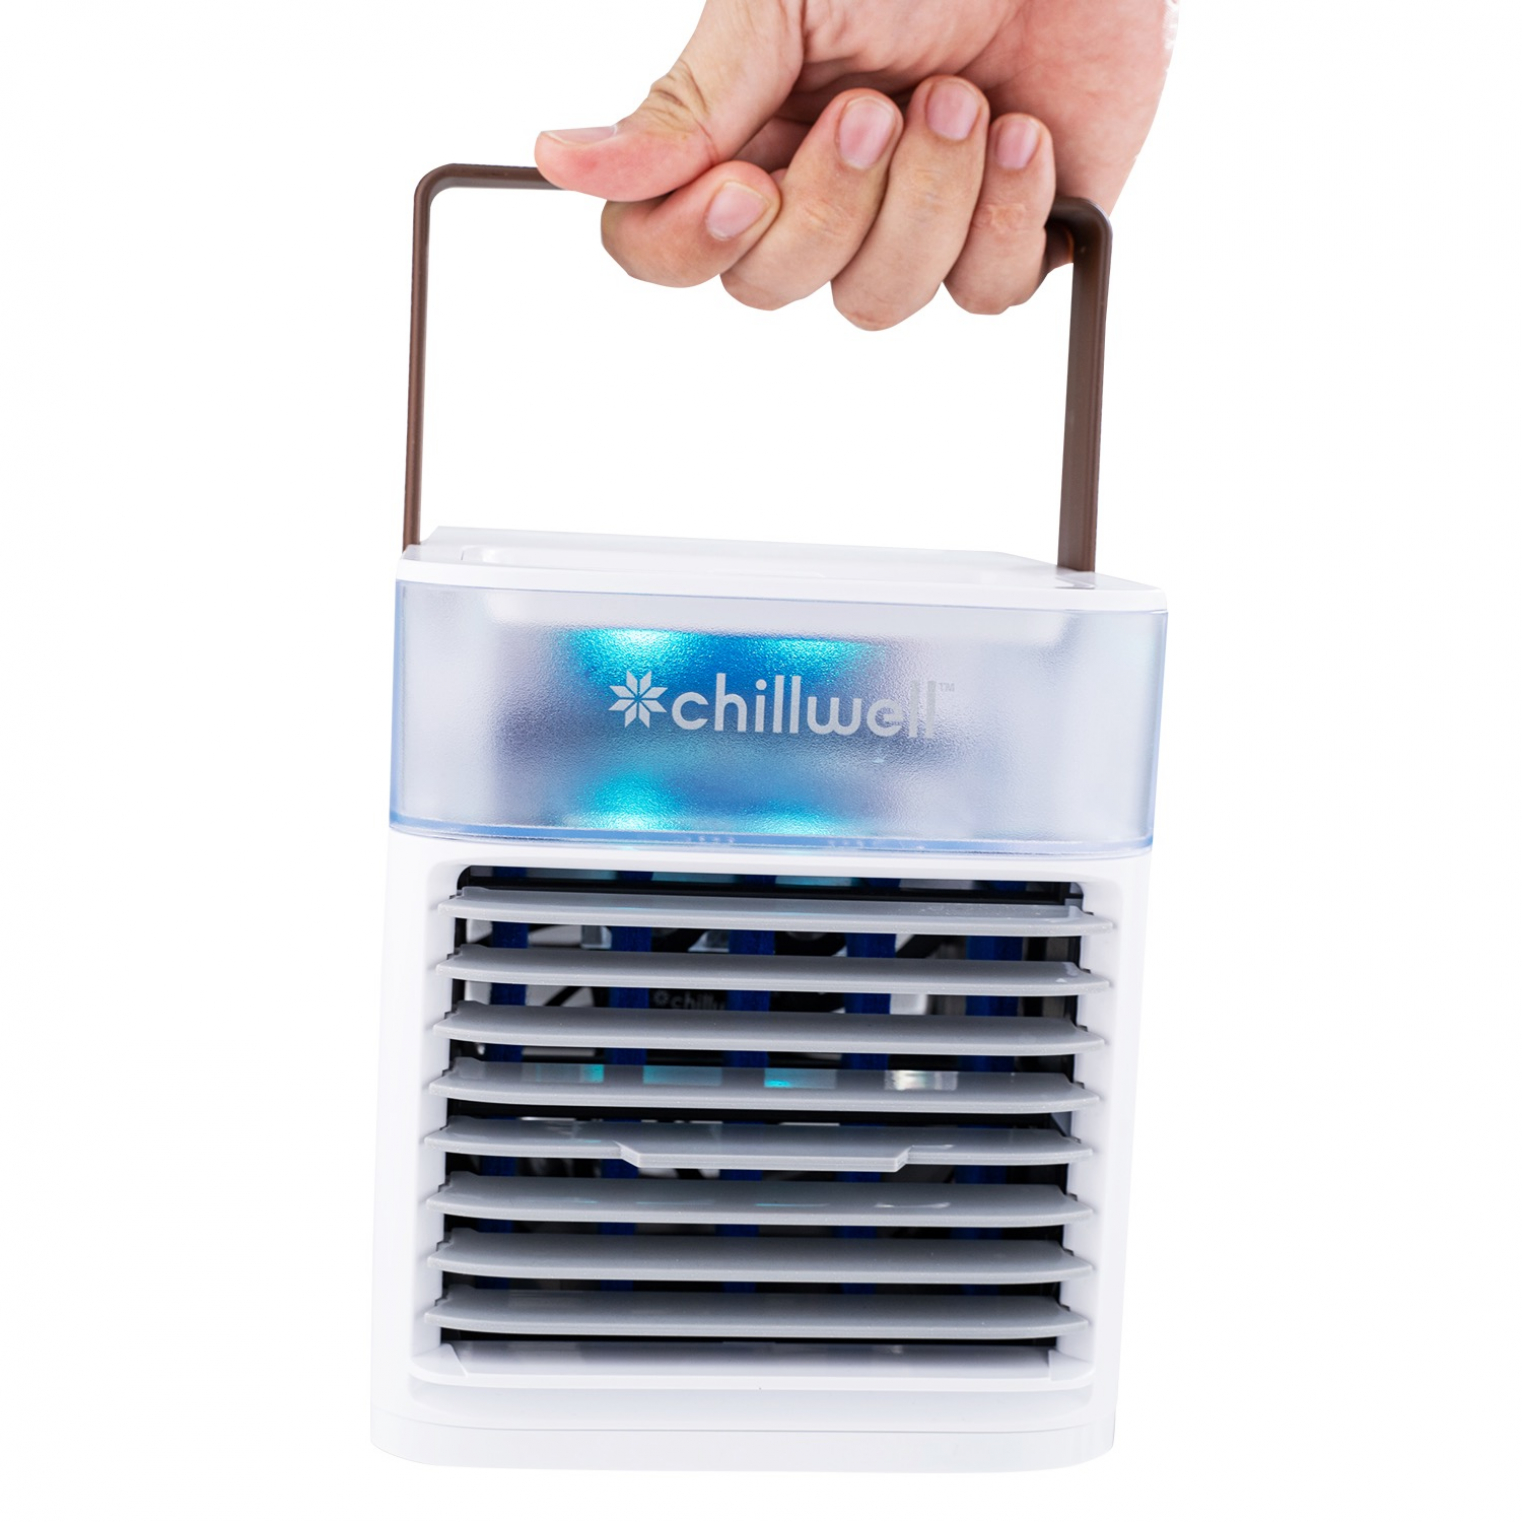 Does The Chillwell AC Really Work